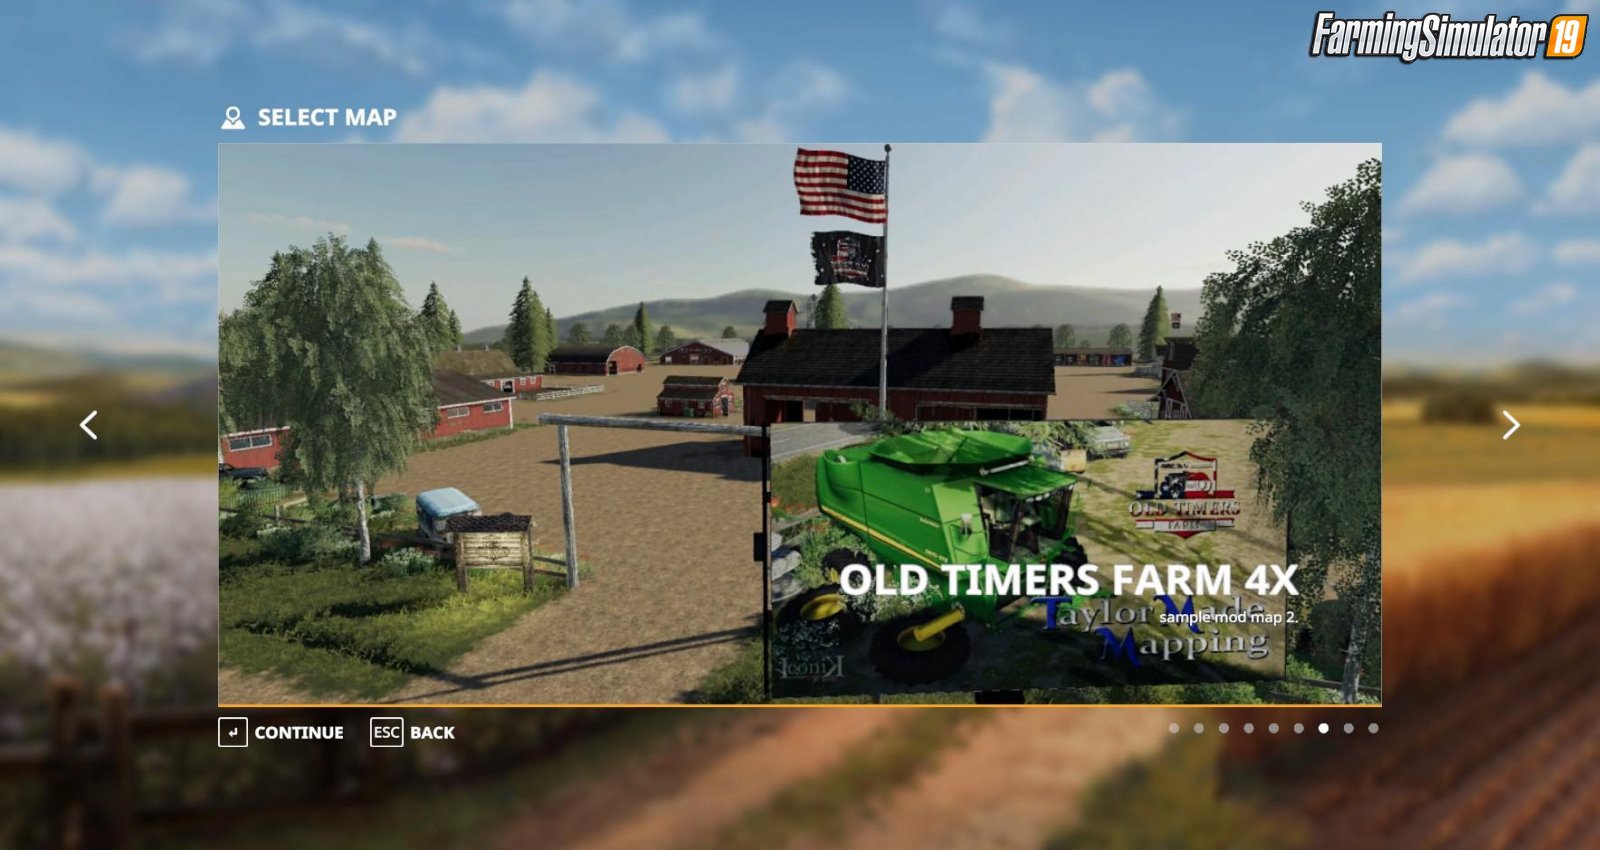 Old Timers Farm Map v1.1 by Cazz64 for FS19